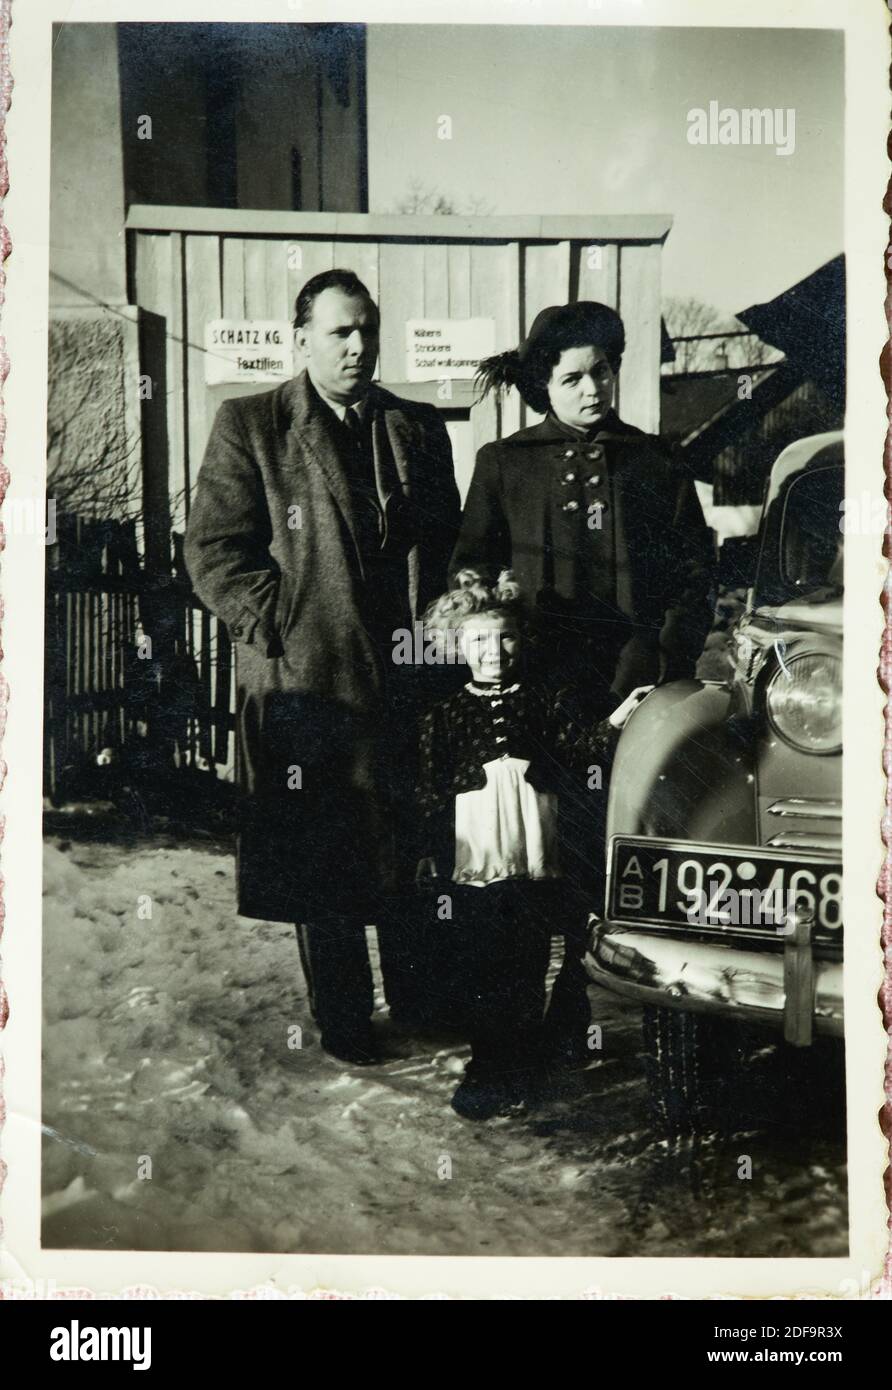 Historical Photo:  Family with daughter in winter times 1952 next to a oldtimer Opel Olympia car, Reproduction in Marktoberdorf, Germany, October 26, 2020.  © Peter Schatz / Alamy Stock Photos Stock Photo